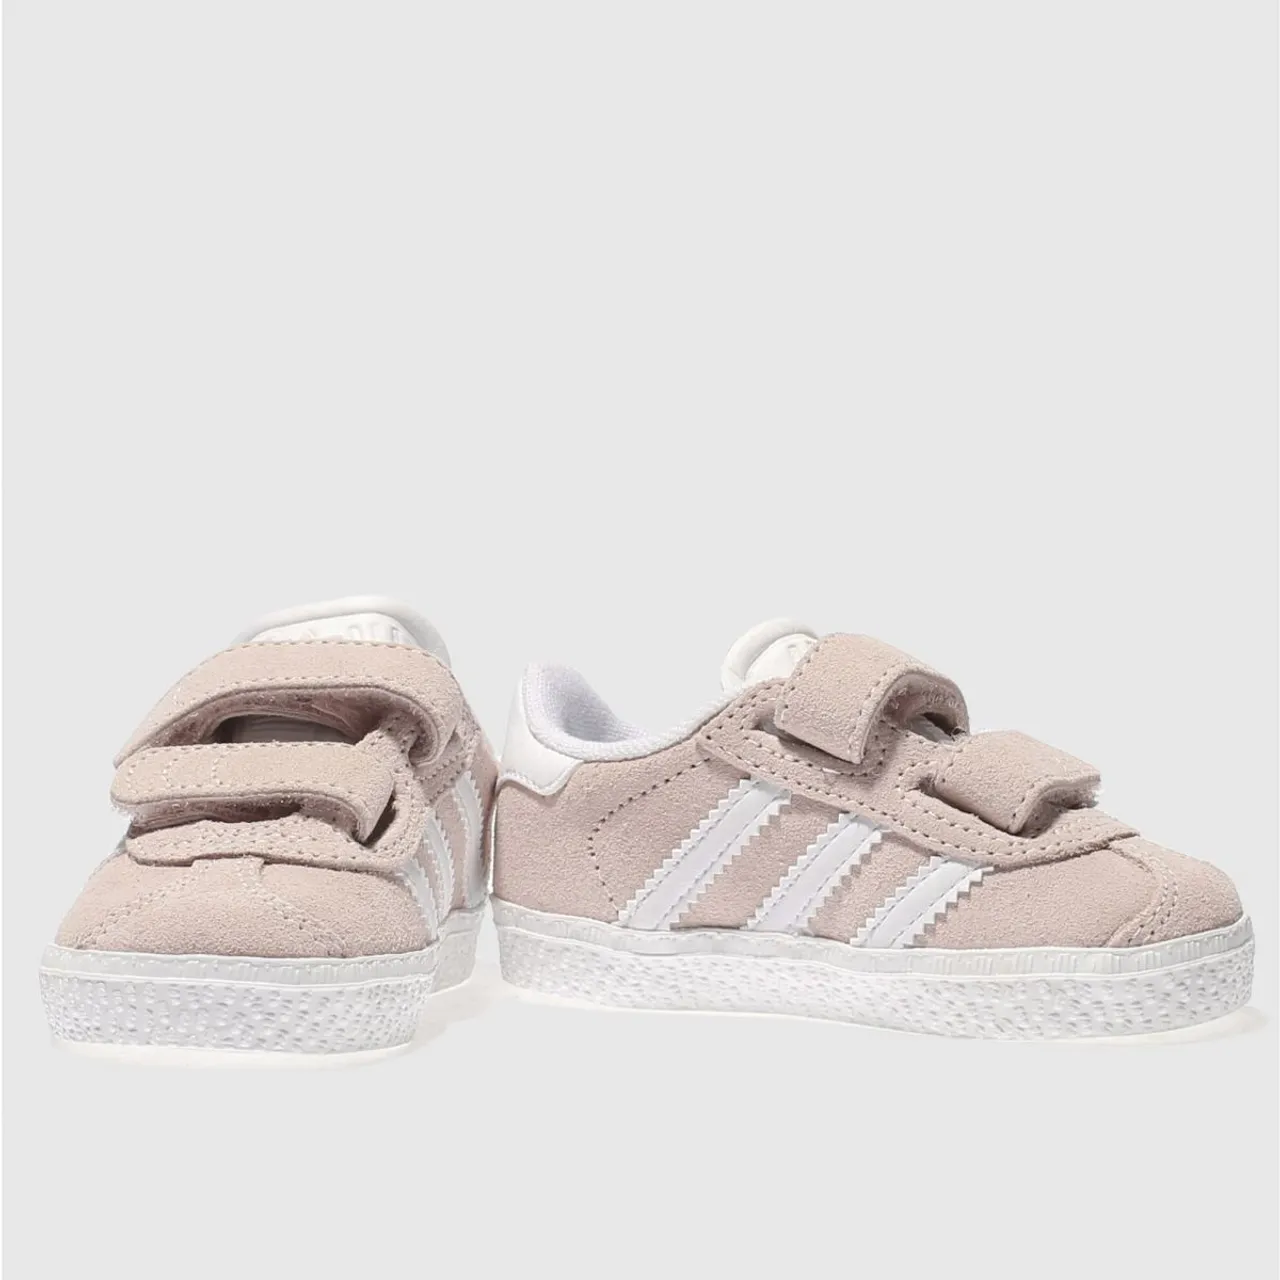 Adidas Pale Pink Gazelle Girls Toddler Trainers